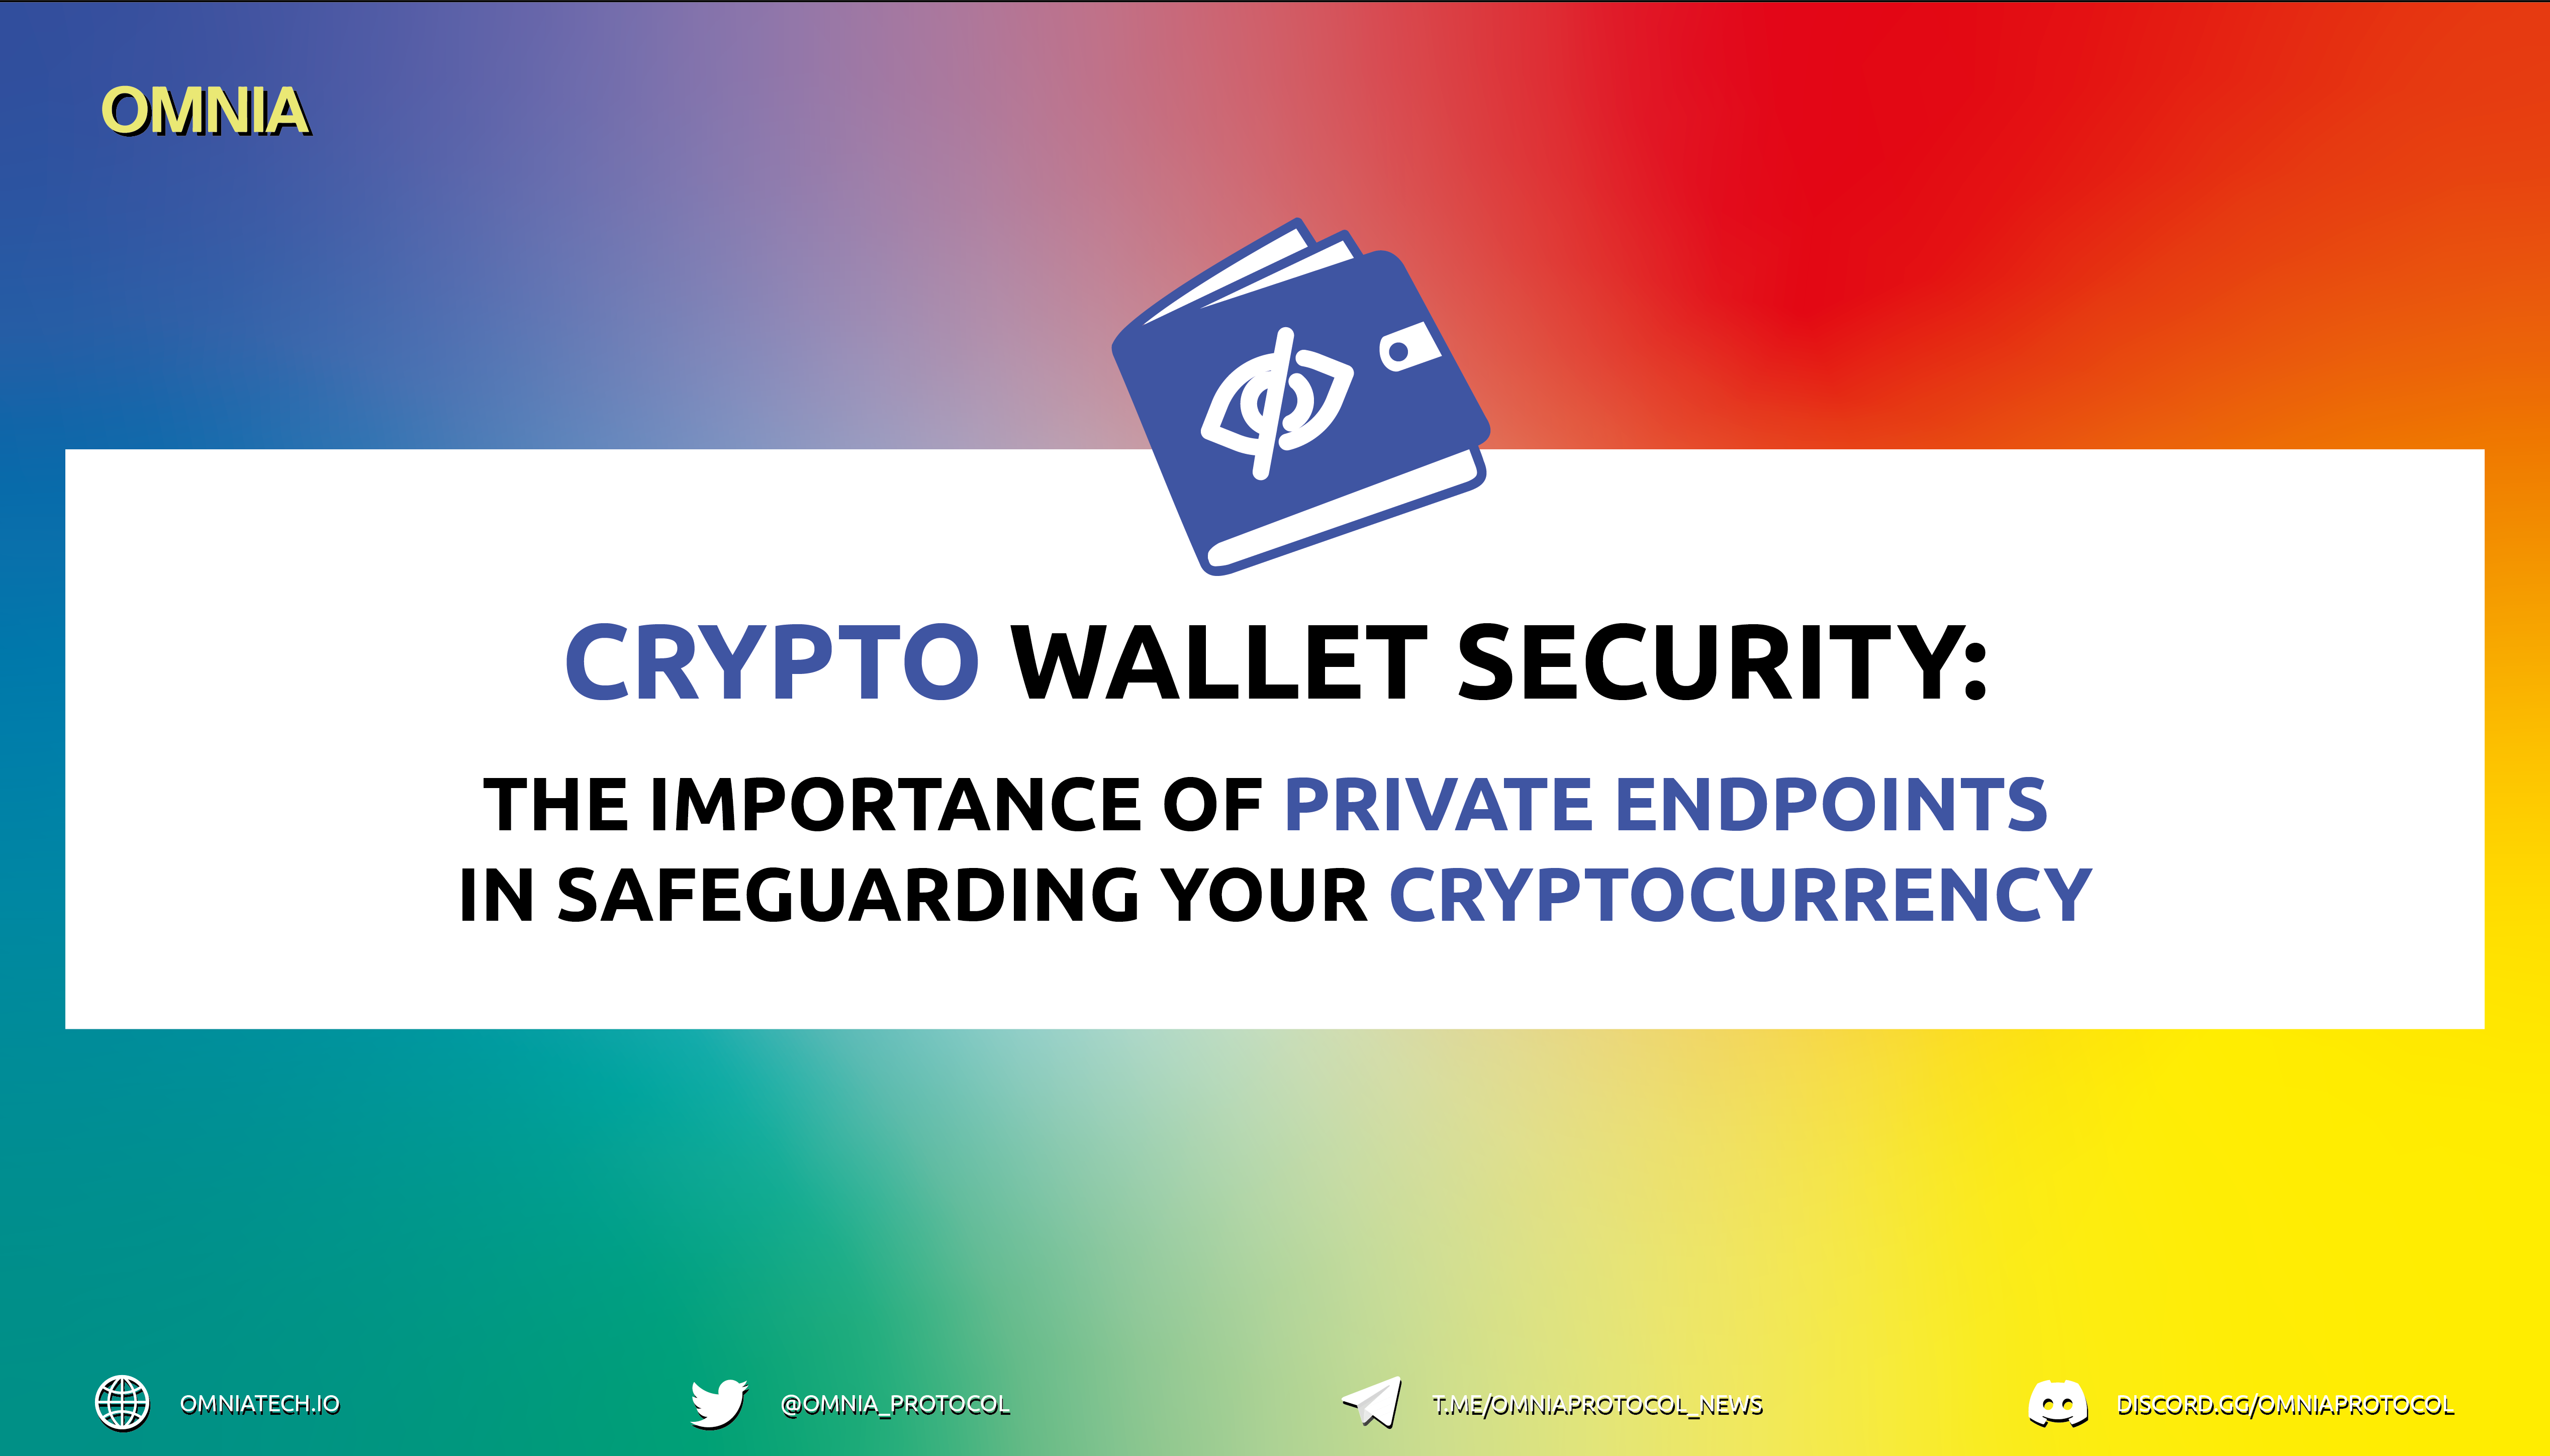 Crypto Wallet Security: The Importance of Private Endpoints in Safeguarding Your Cryptocurrency